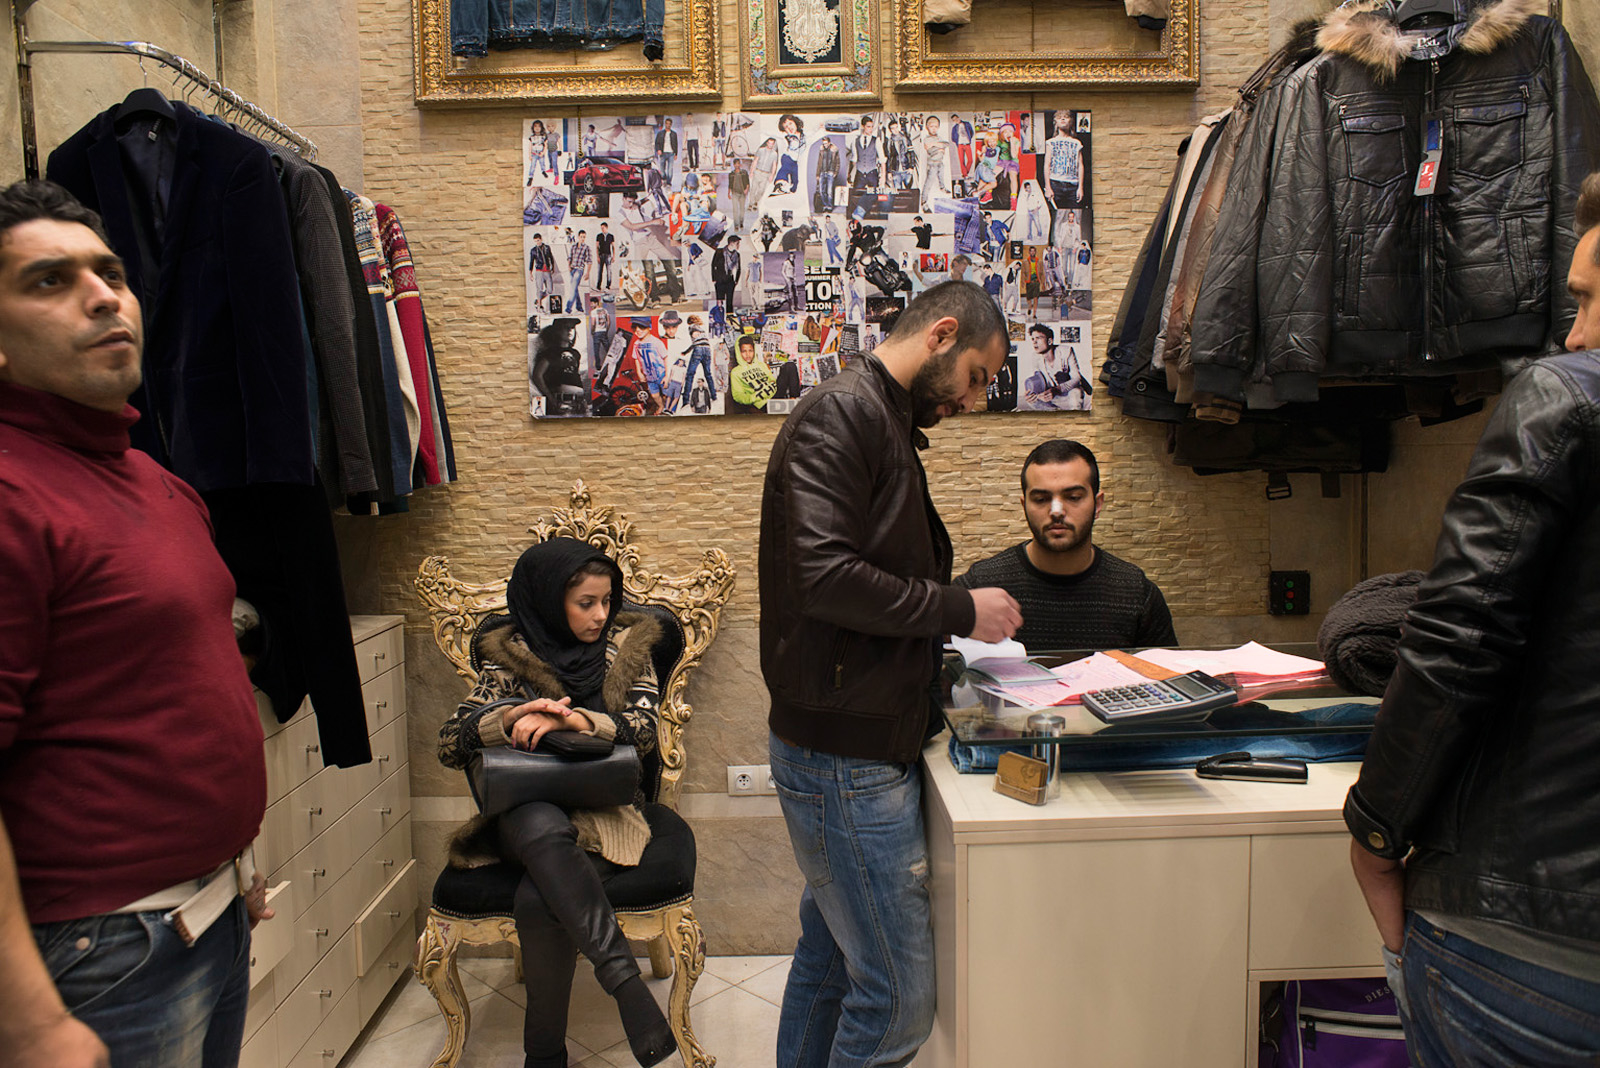 At the Grand Bazar, a clothing store sells fashion and clothing imported from Turkey, which has got more difficult and more expensive, making it hard to compete with locally made fashion goods. Tehran, Iran, Nov. 18, 2013.